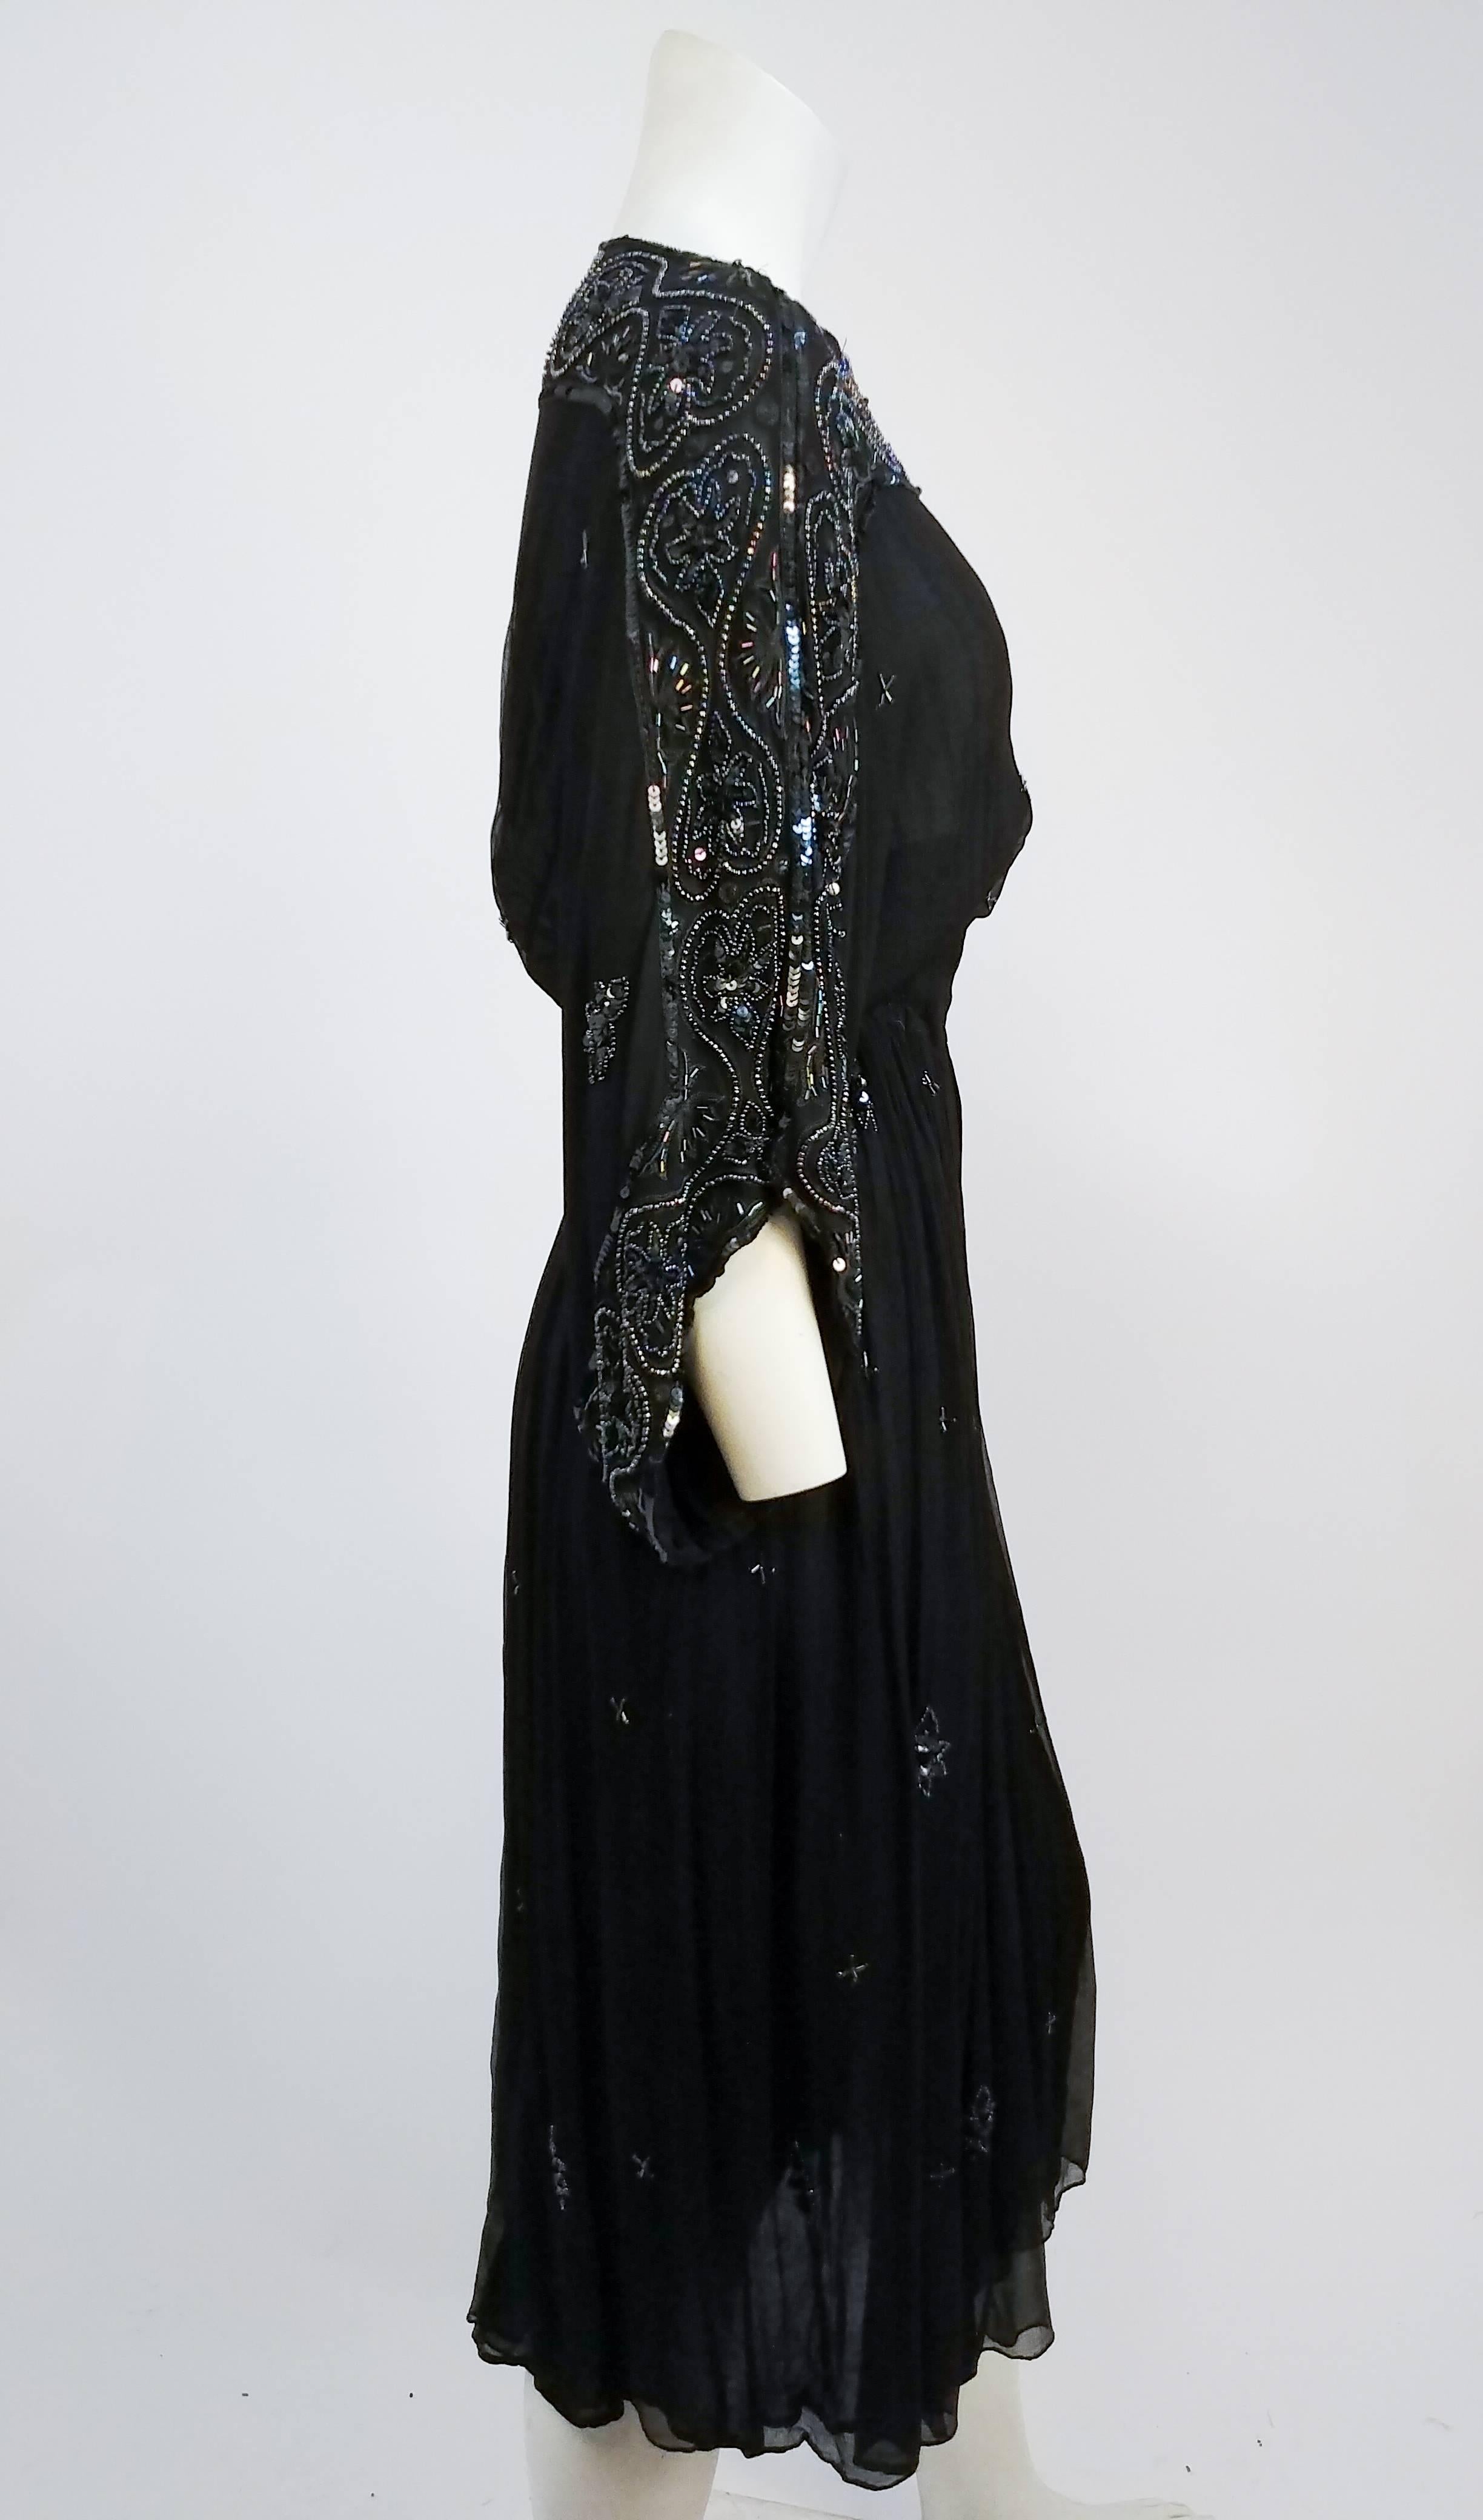 1970s Judith Ann Beaded Silk Chiffon Black Dress. Border beaded onto sleeve and neckline, with sporadic beading throughout bodice and skirt. Elasticated waistband, no closures. Loosely woven black silk chiffon for light, airy feel. 